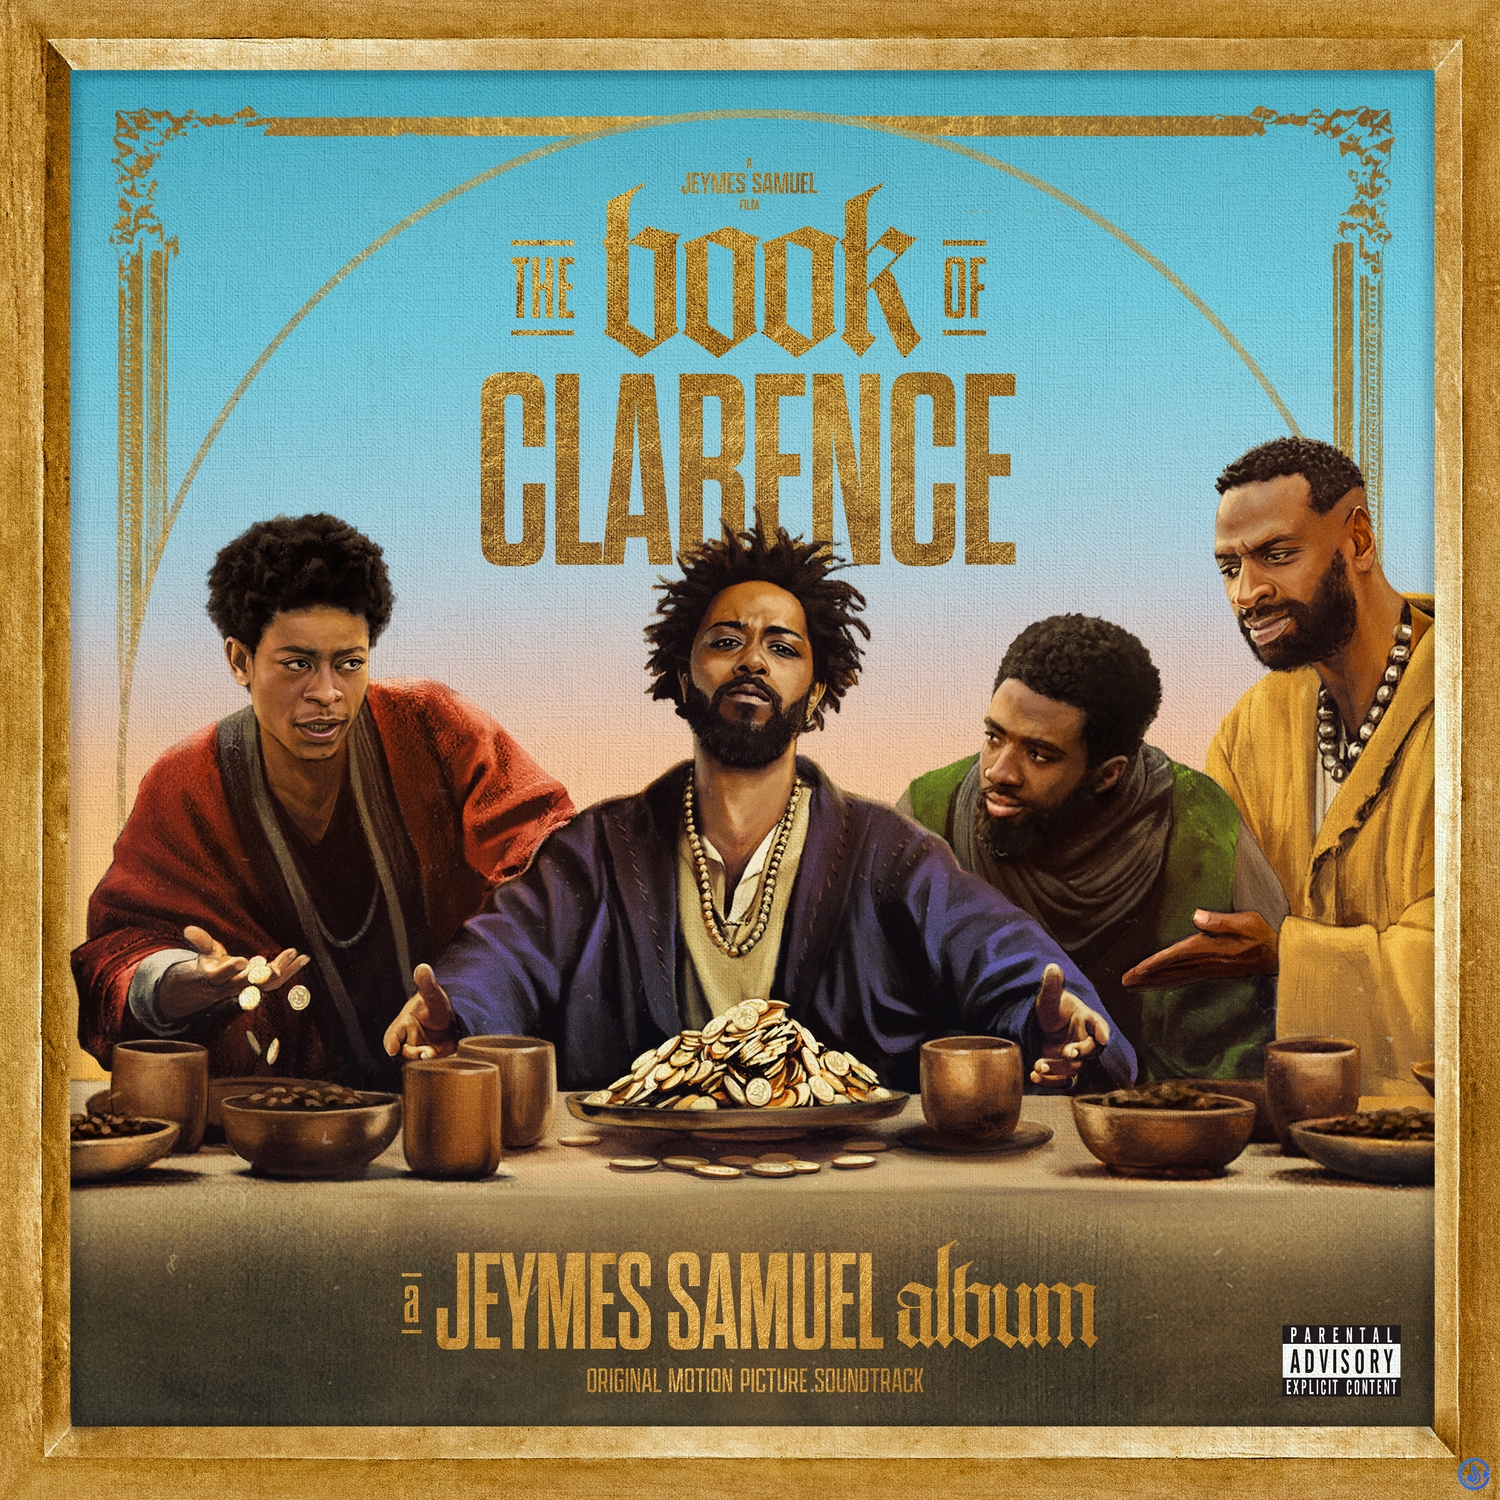 THE BOOK OF CLARENCE (The Motion Picture Soundtrack) Album